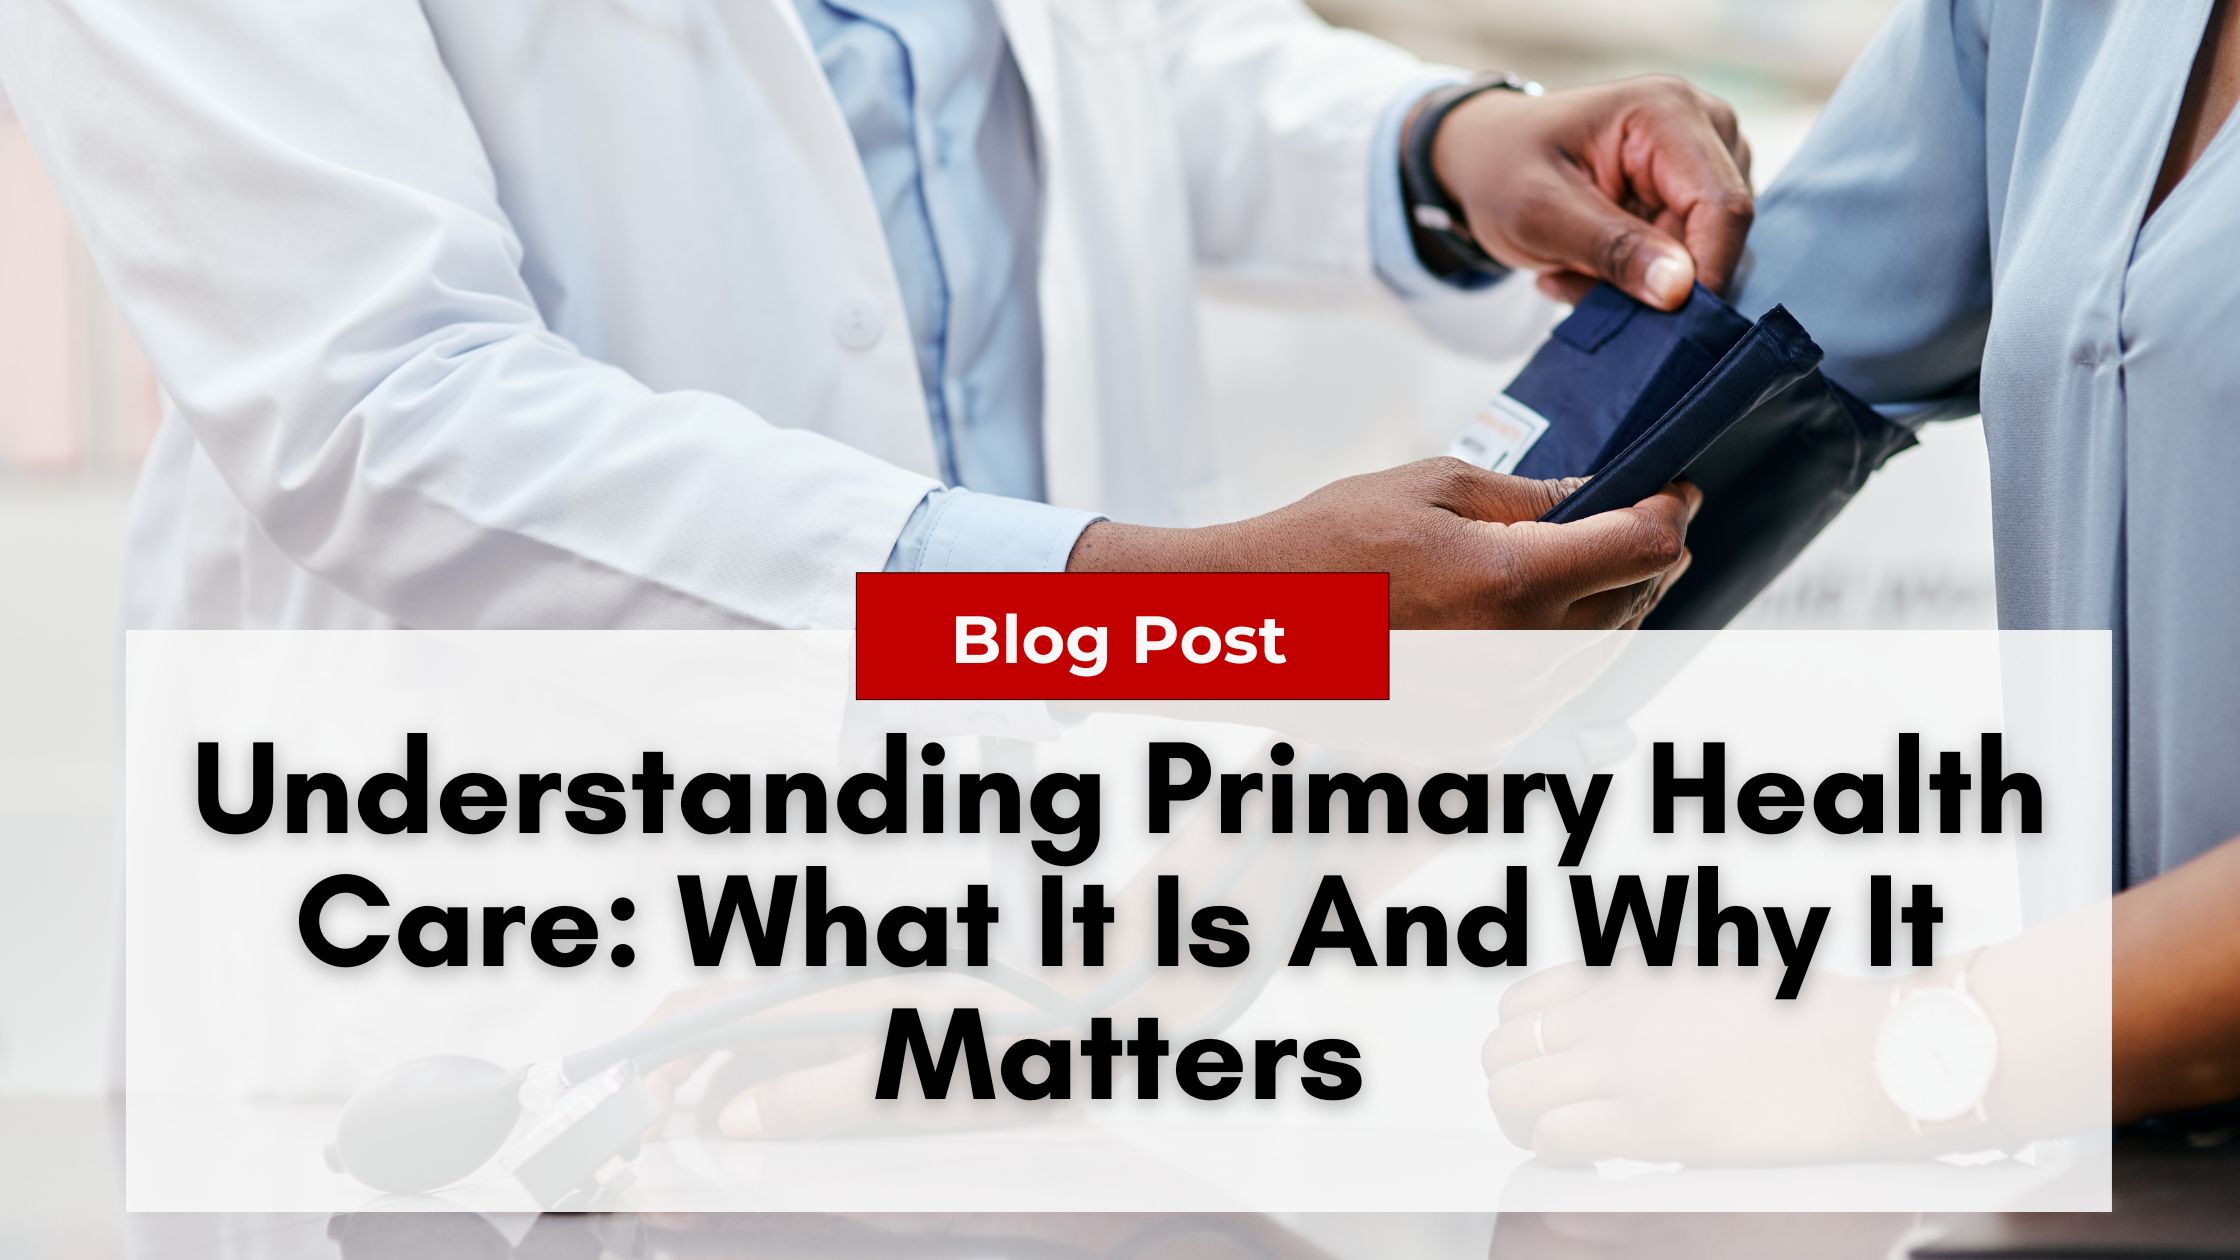 A healthcare professional measures a patient's blood pressure. The image has text reading, "Blog Post: Understanding Primary Health Care: What It Is and Why It Matters." Learn how addressing nurse practitioner burnout is crucial for maintaining quality primary health care.